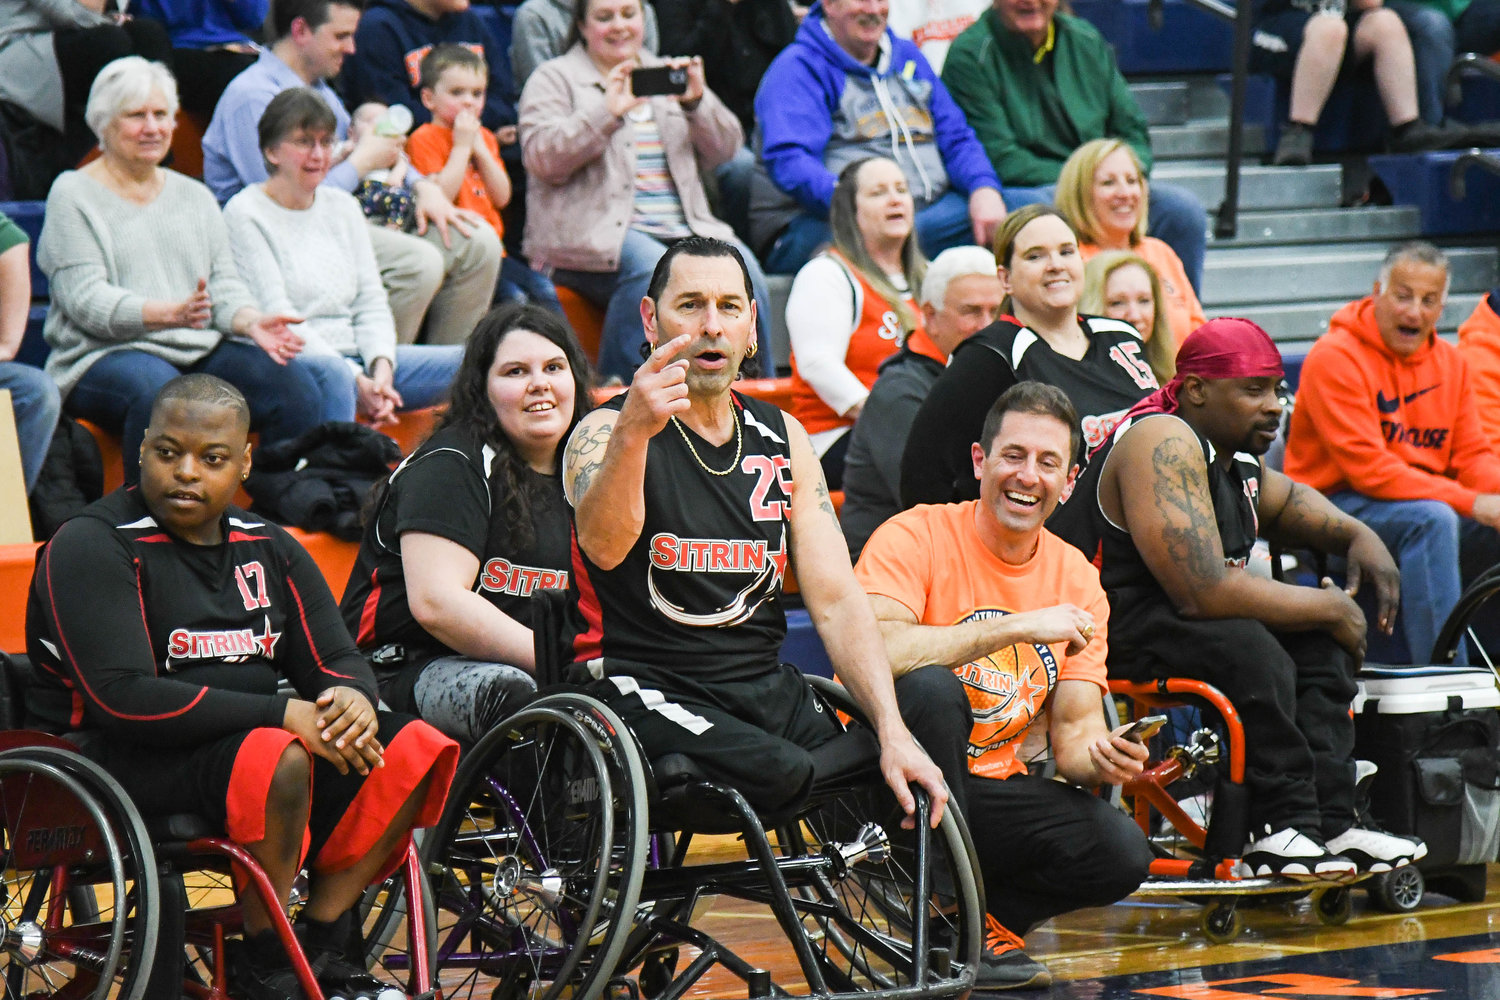 Sitrin players cheer during 18th annual Sitrin Celebrity Wheelchair Basketball Game on Thursday night at Utica University.